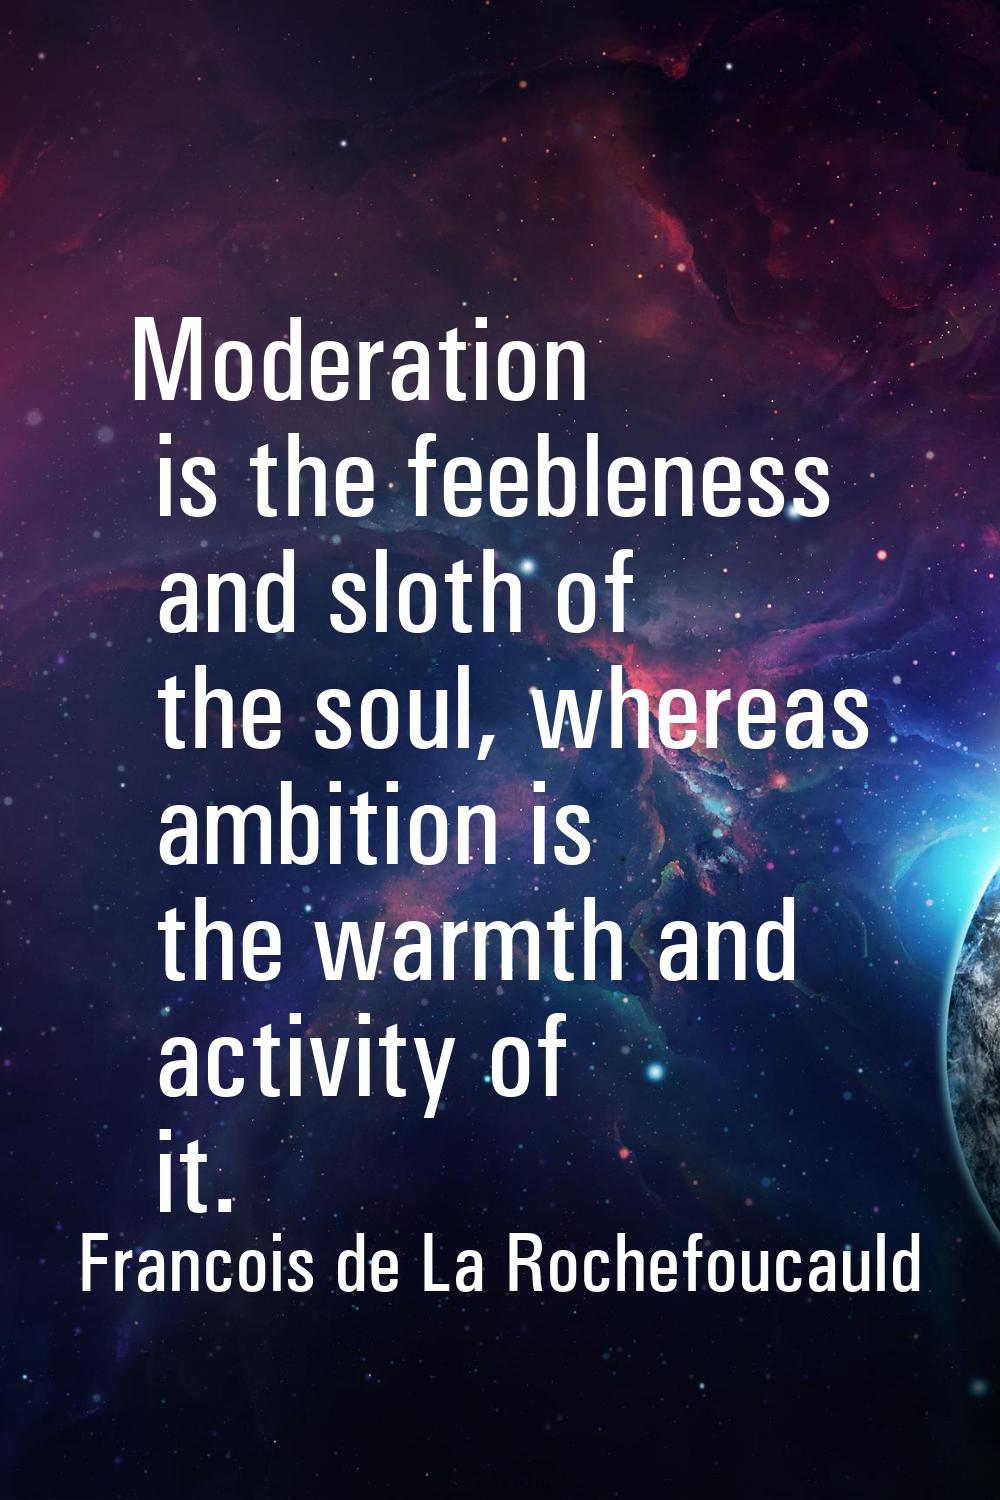 Moderation is the feebleness and sloth of the soul, whereas ambition is the warmth and activity of 